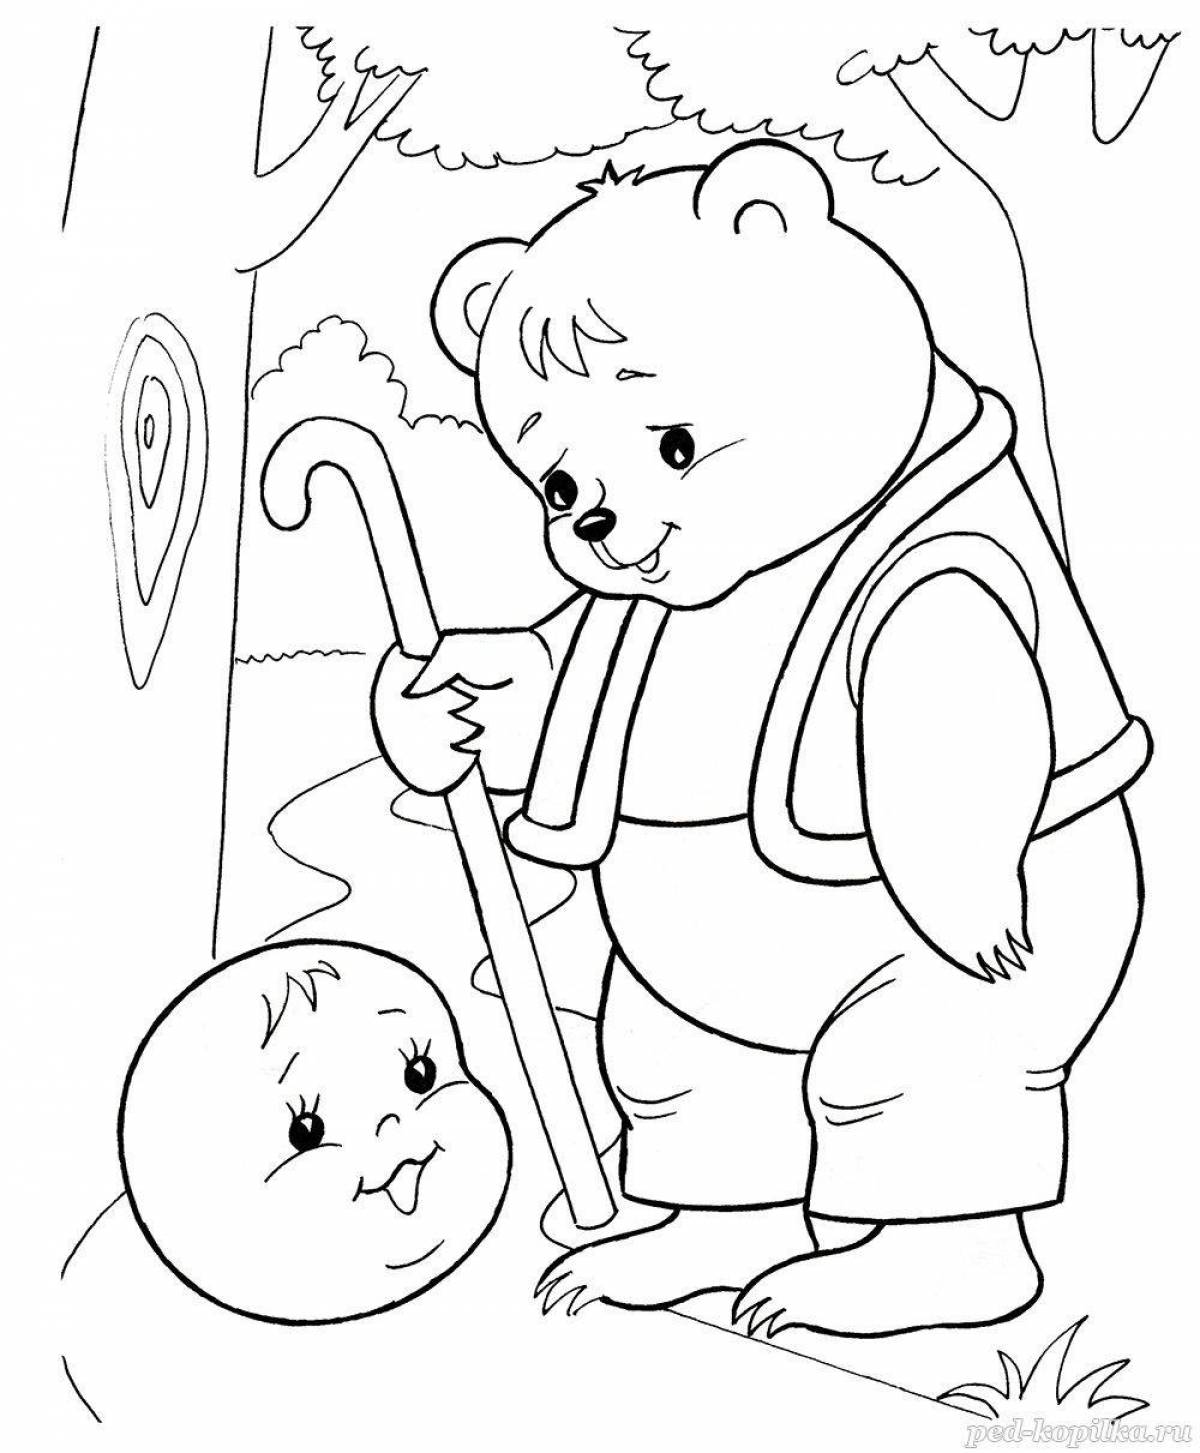 Inviting fairy tale coloring pages